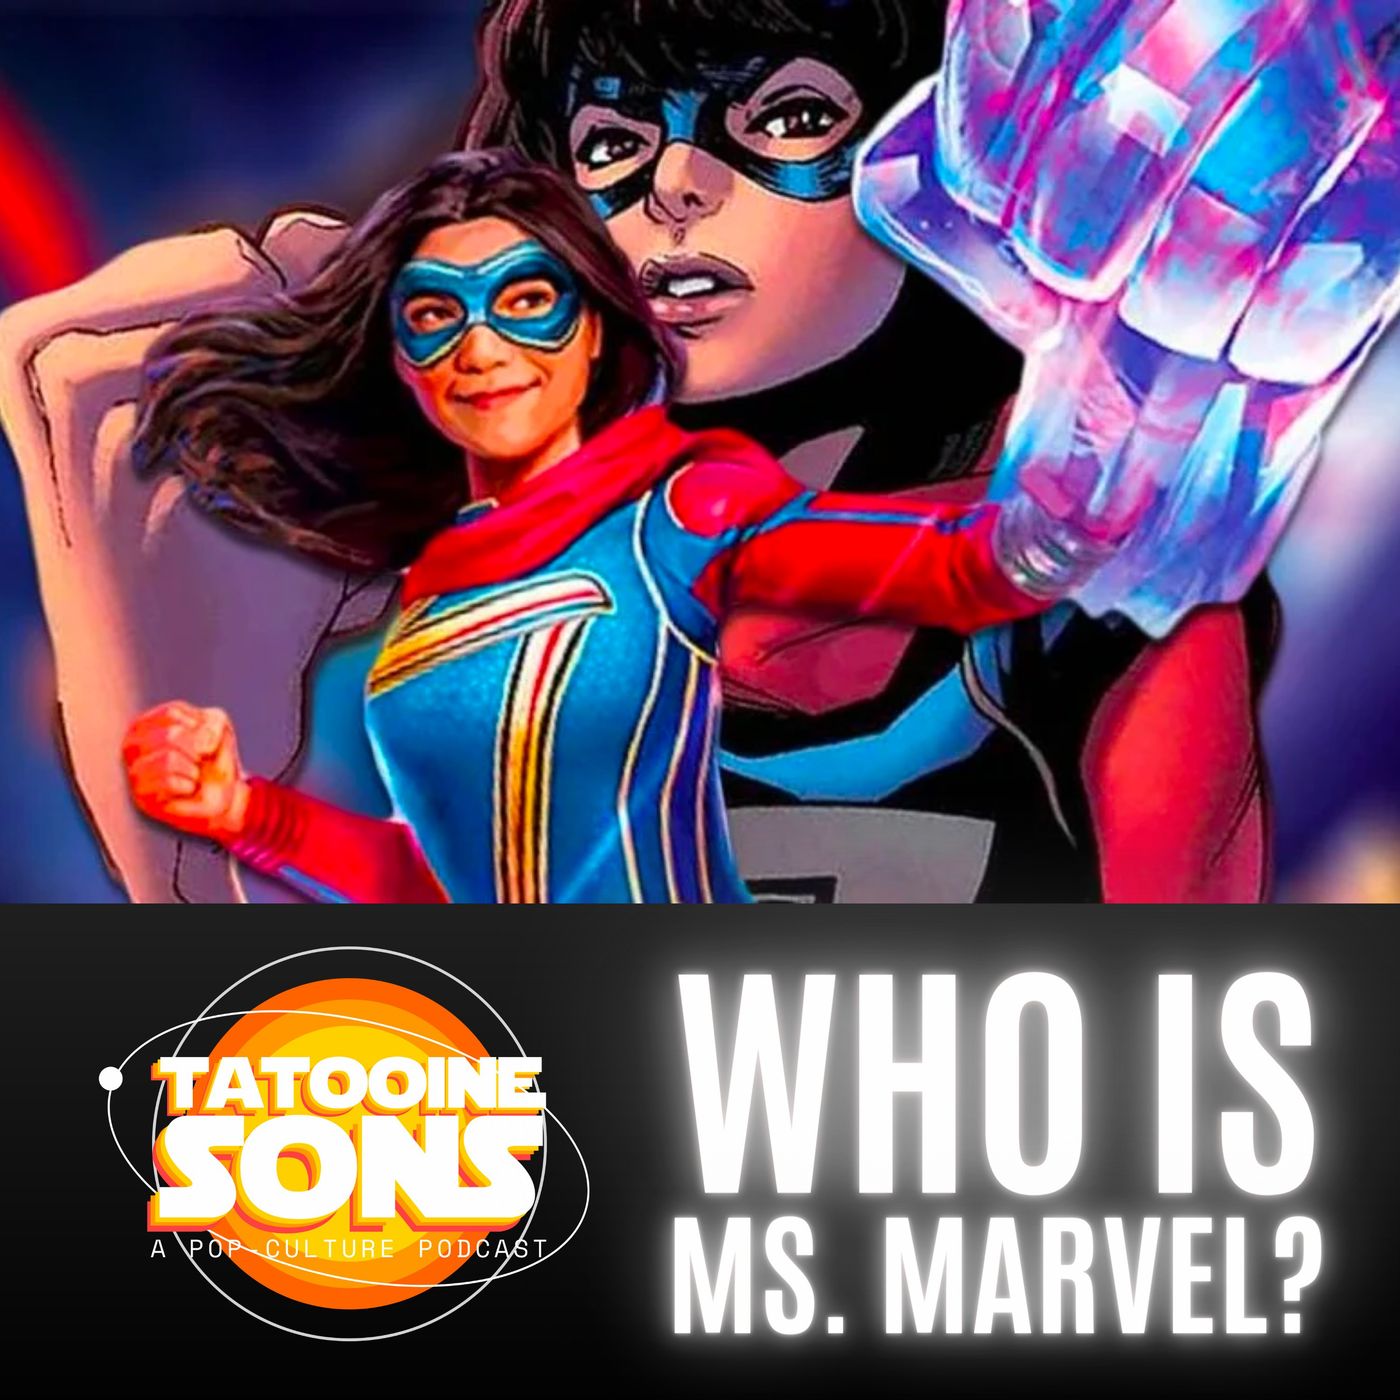 Who Is Ms. Marvel?